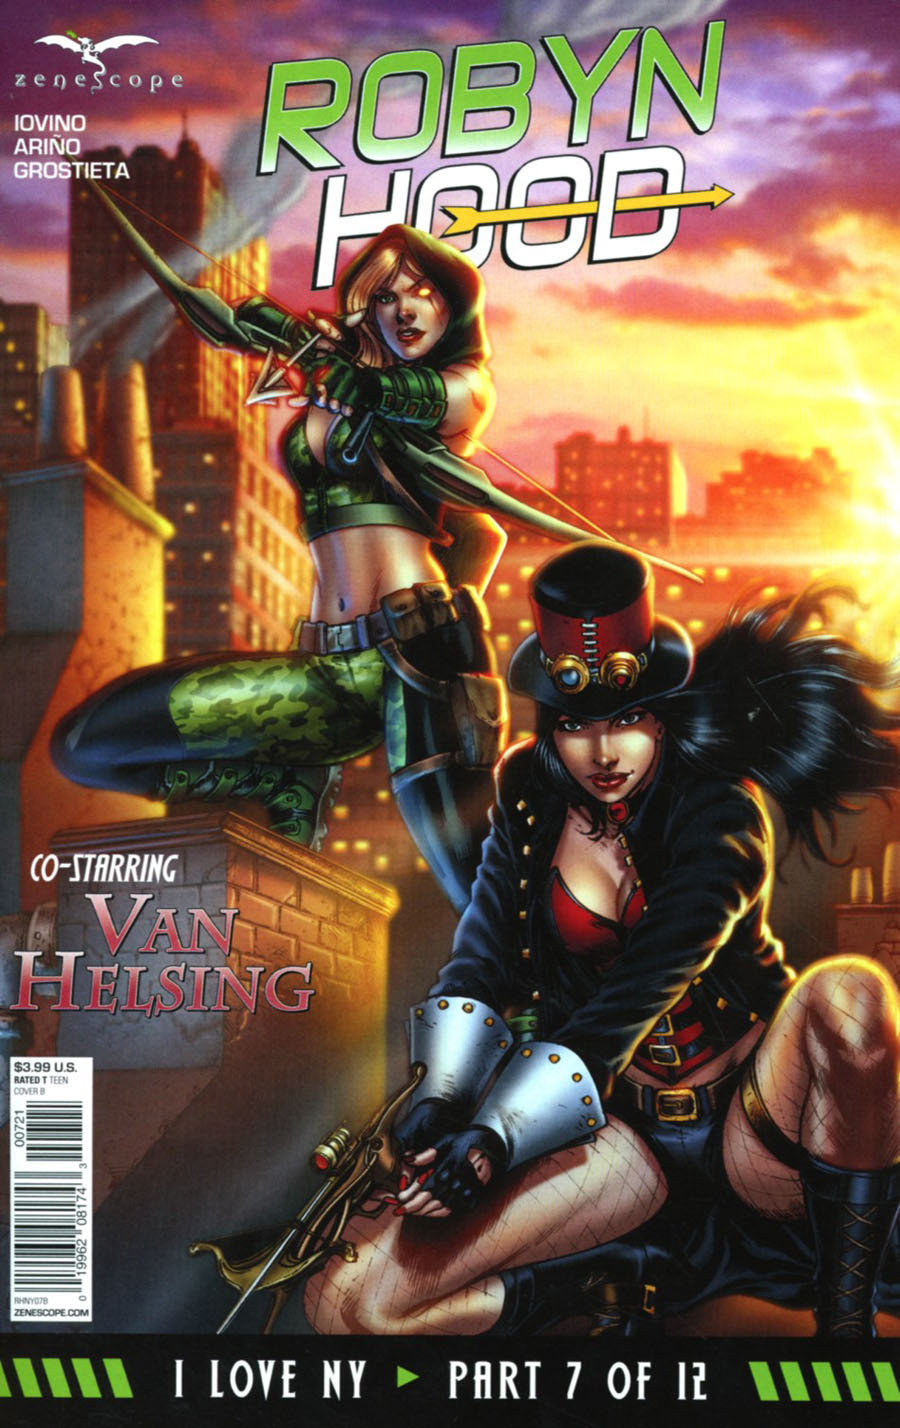 Grimm Fairy Tales Presents Robyn Hood I Love NY #7 Cover B Jose Luis